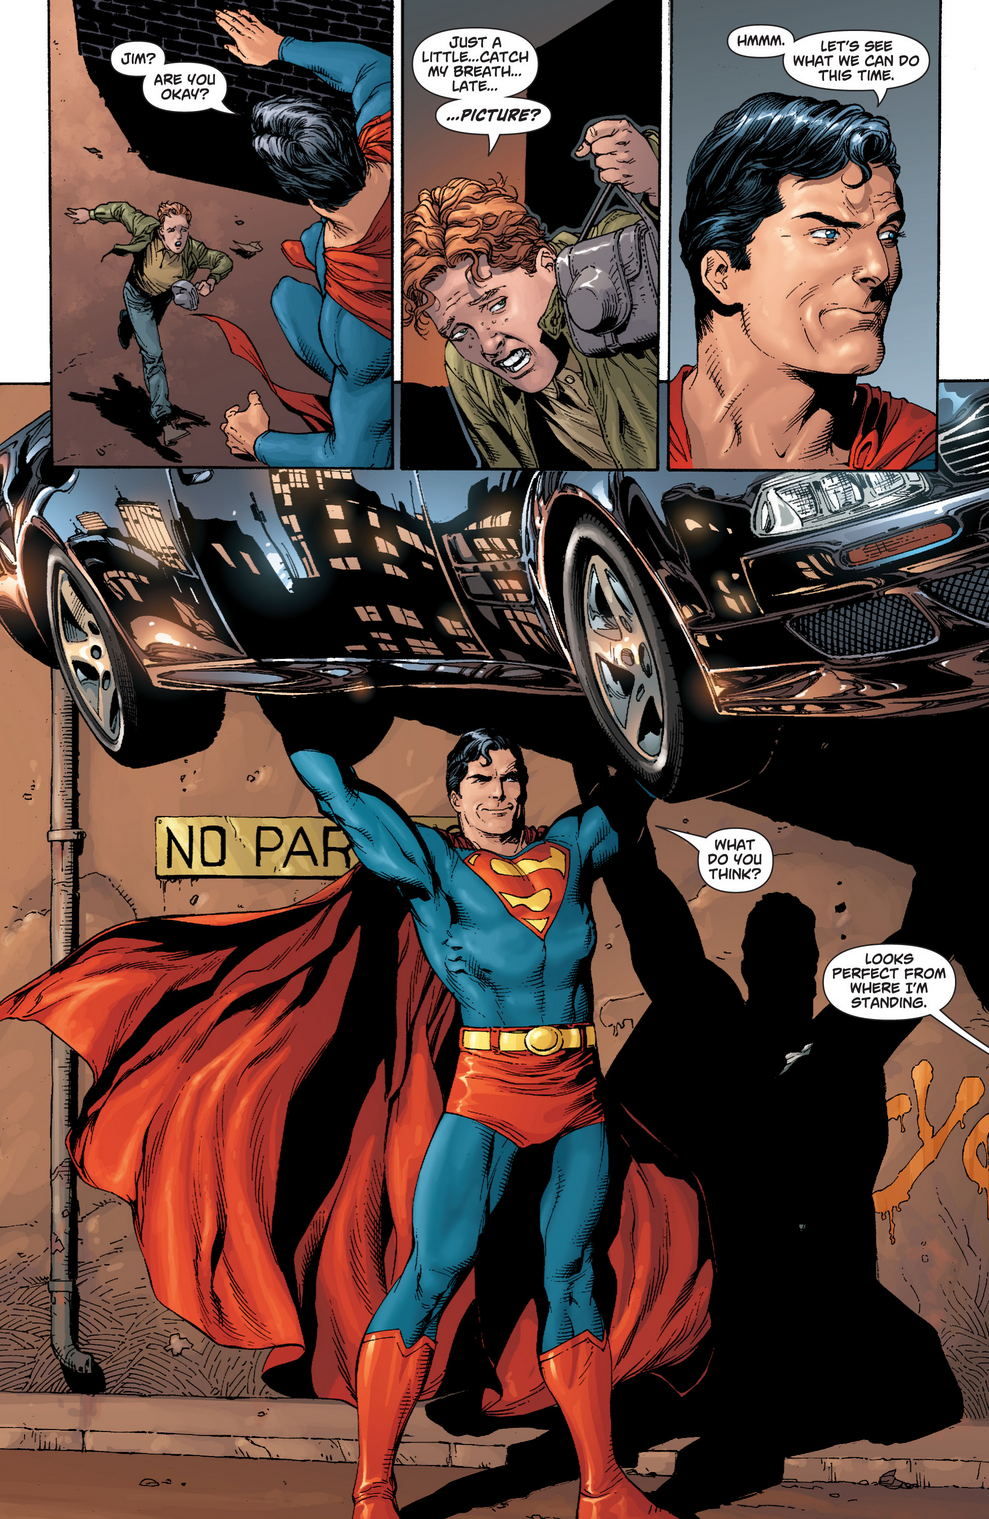 Superman strikes a pose for Jimmy Olsen in Superman: Secret Origin Vol. 1 #5 (2010), DC. Words by Geoff Johns, art by Gary Frank, Jon Sibal, Brand Anderson, and Steve Wands.